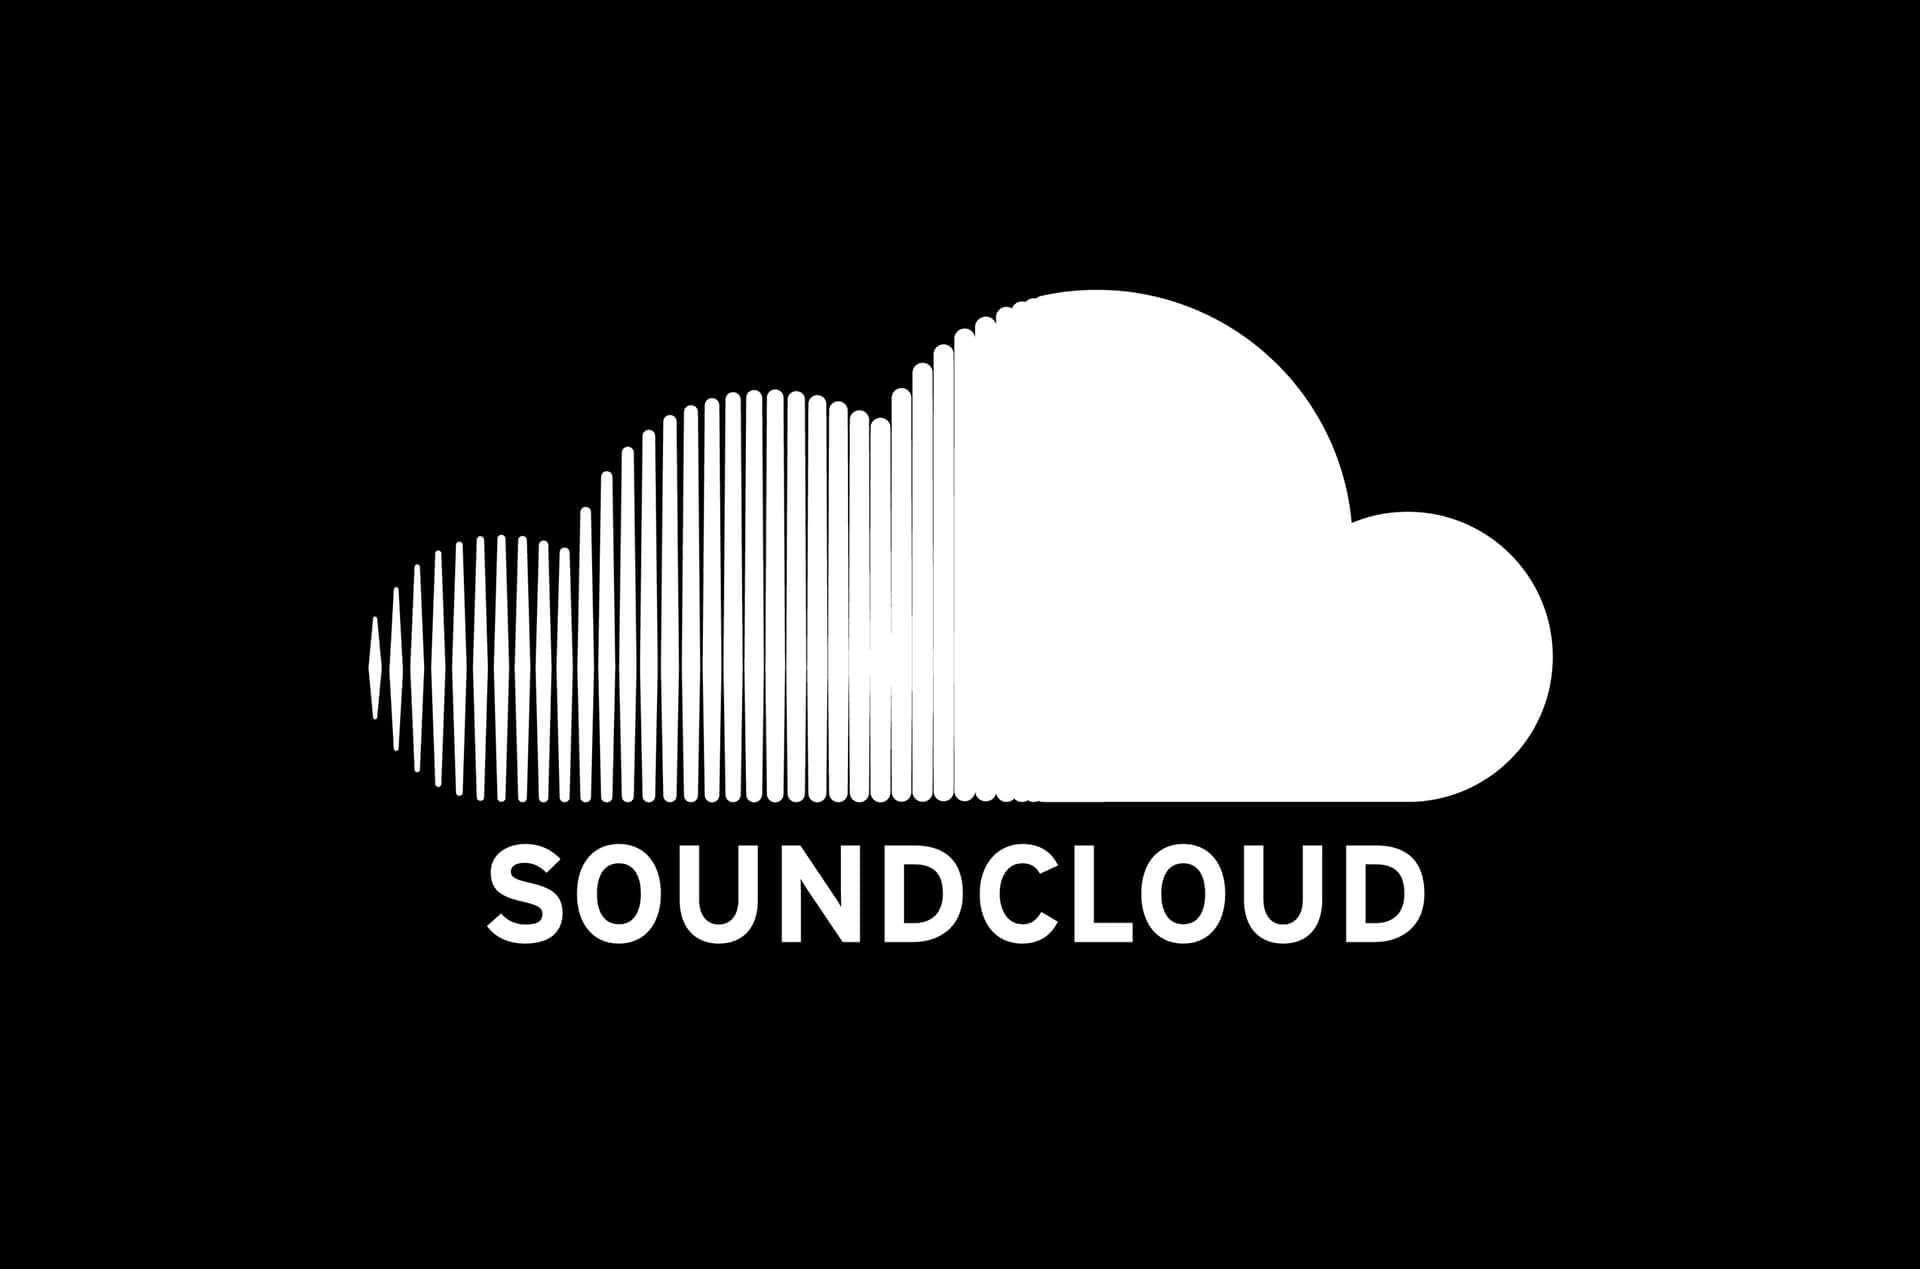 Discover new music and artists with Soundcloud